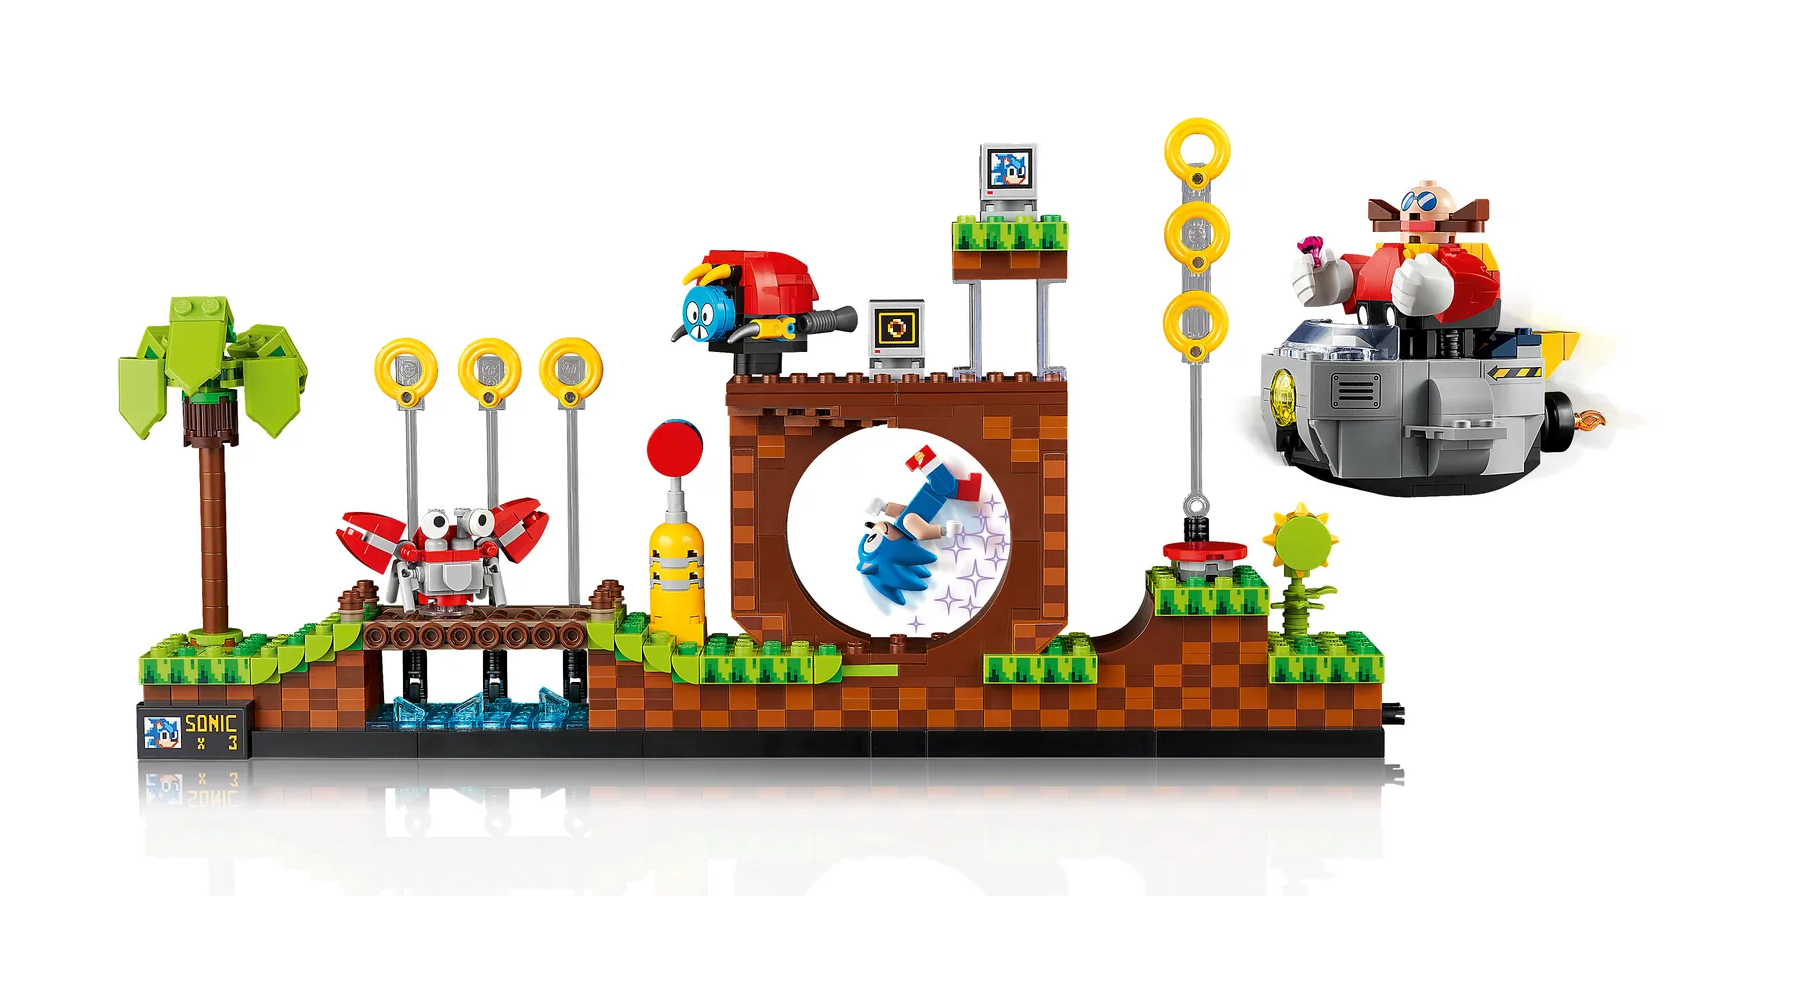 LEGO Sonic the Hedgehog Sets OFFICIALLY Revealed 